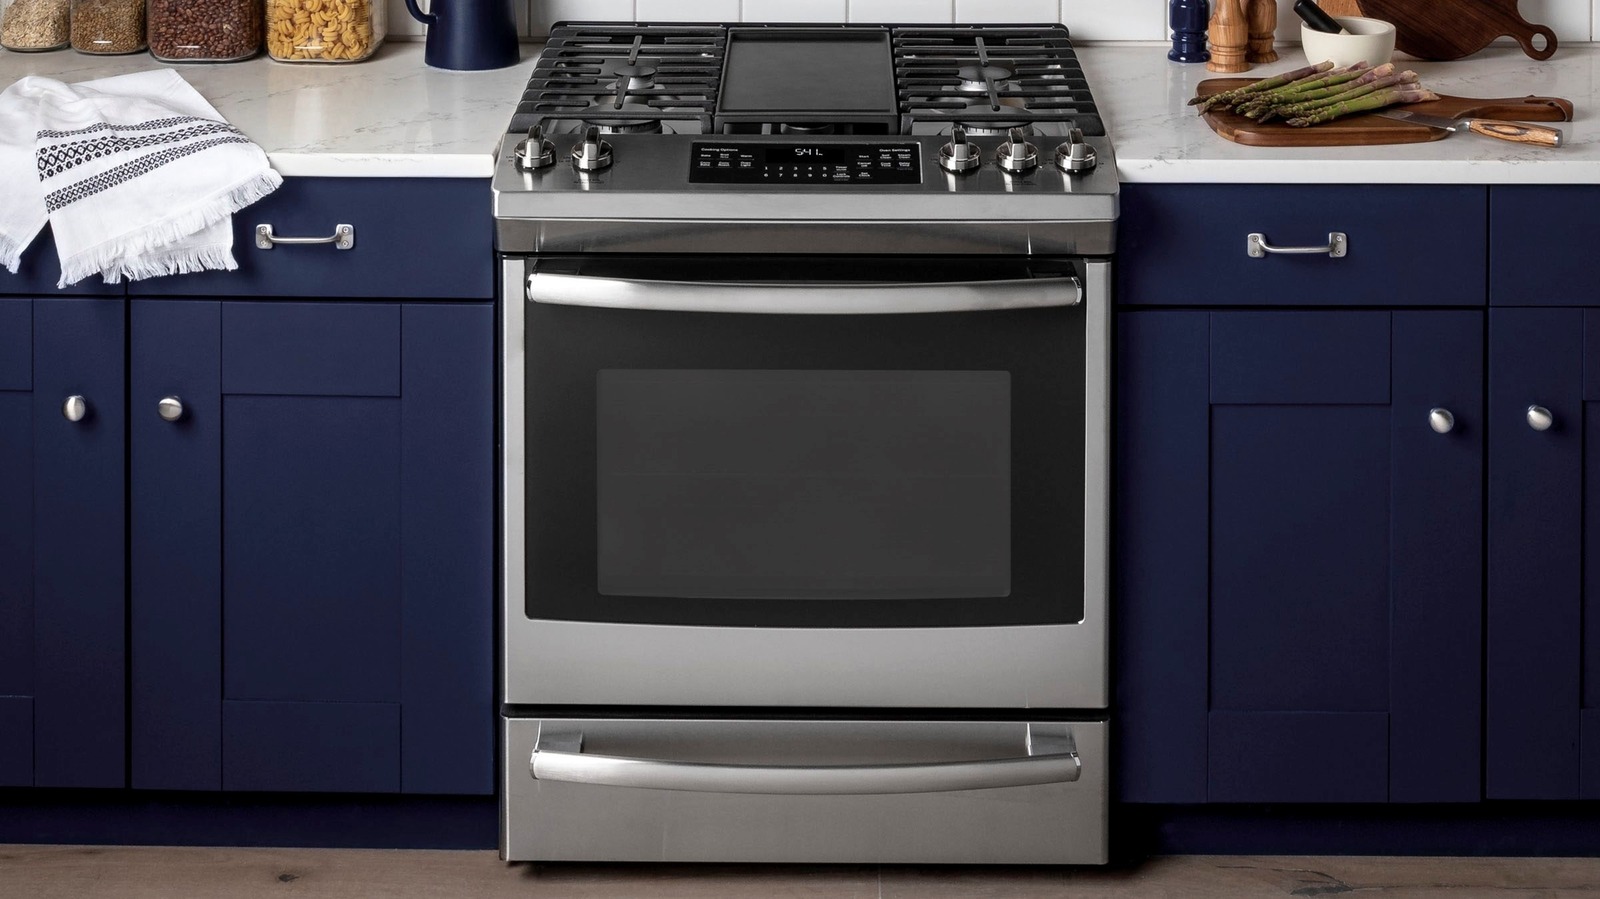 Baking Wars: Convection Ovens vs. Conventional Ovens